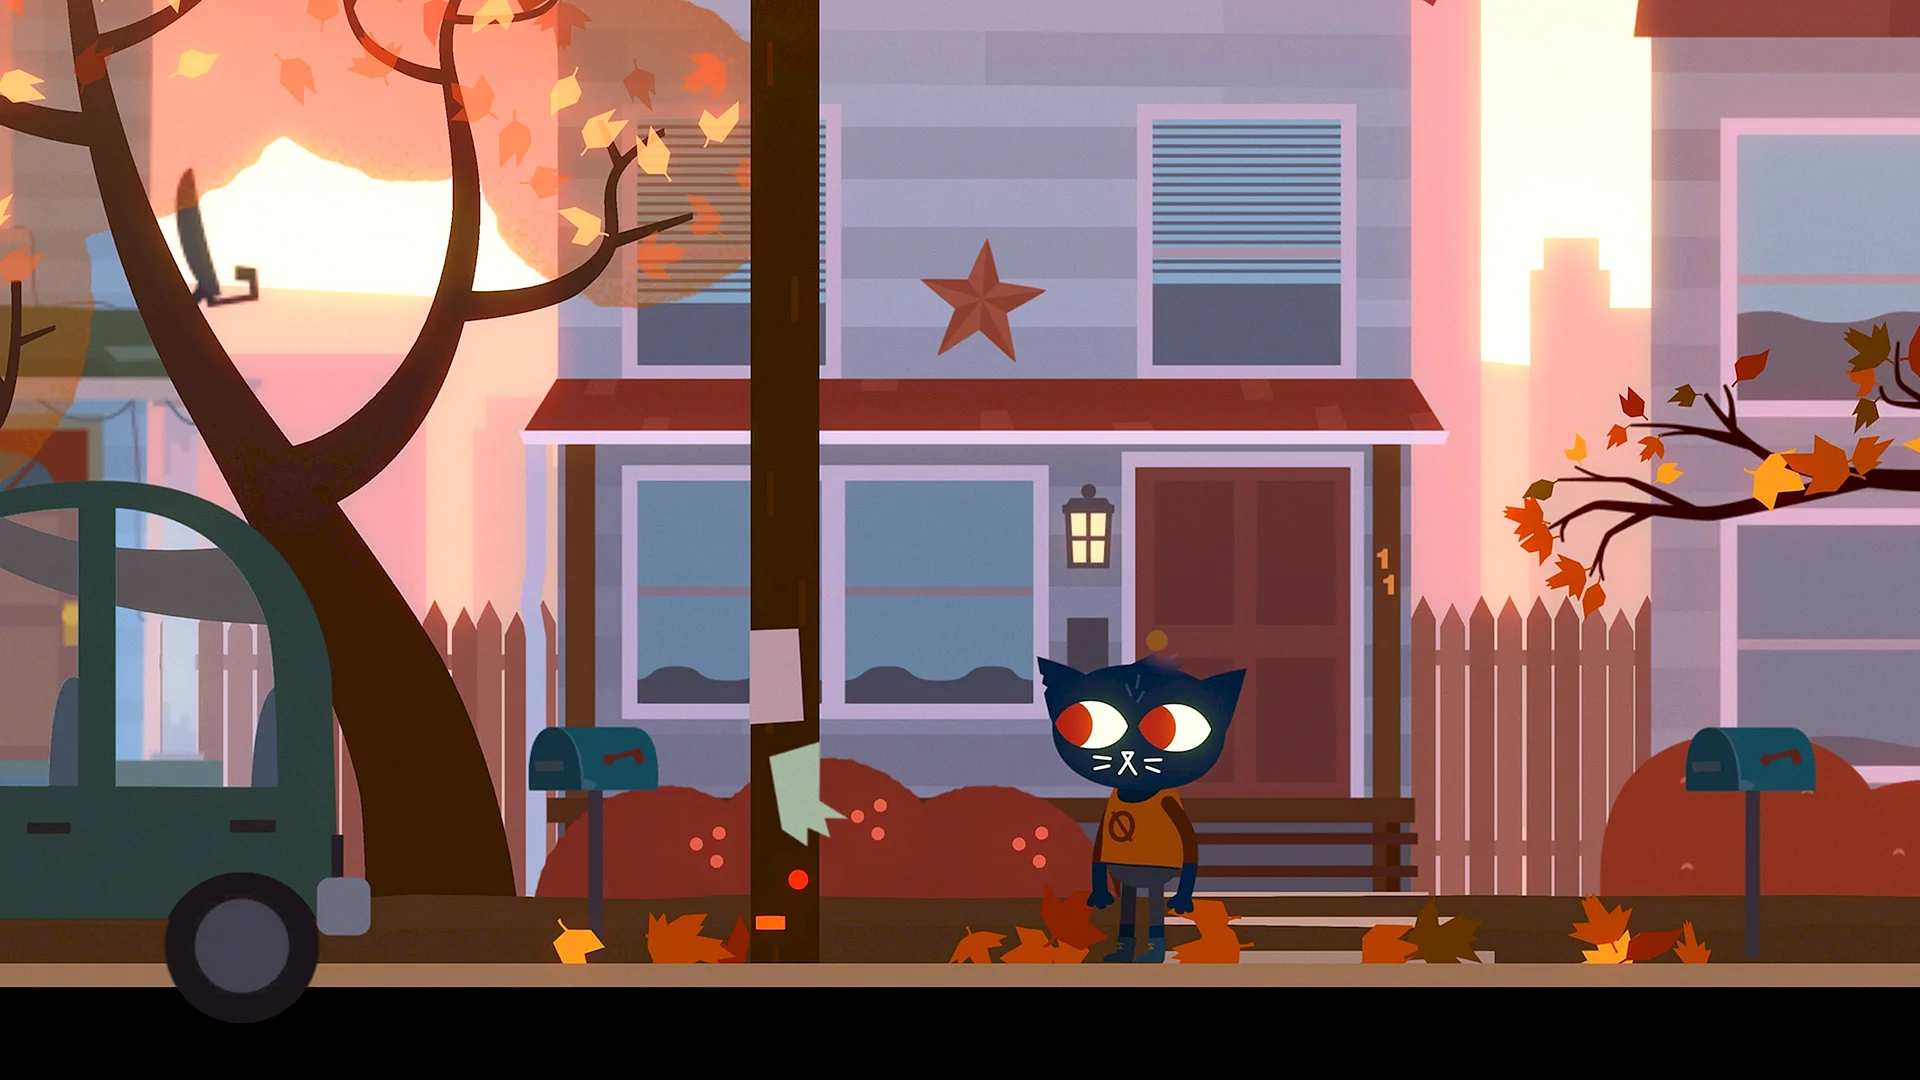 Night In The Woods Wallpaper